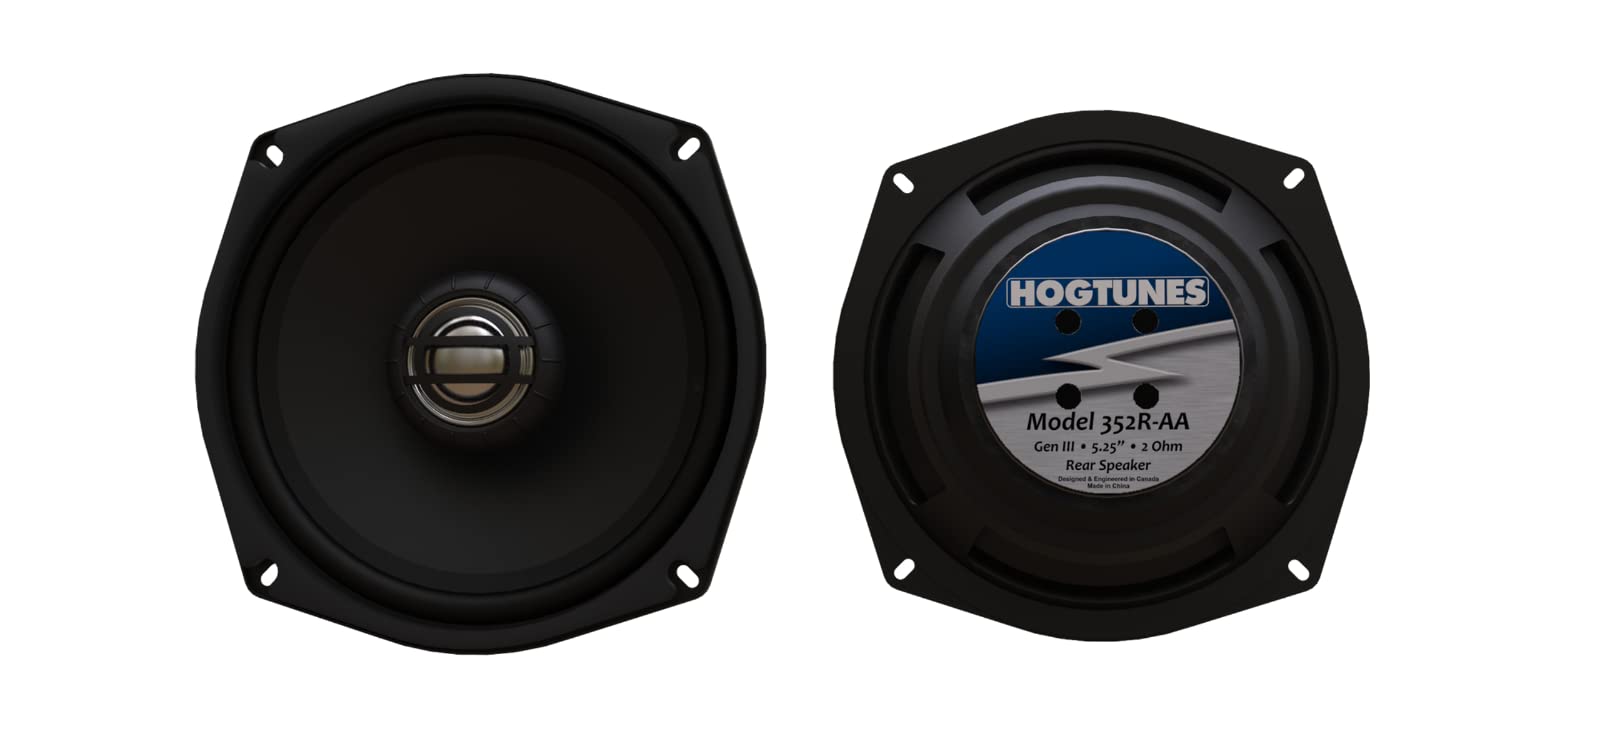 Hogtunes 352R-AA 5.25